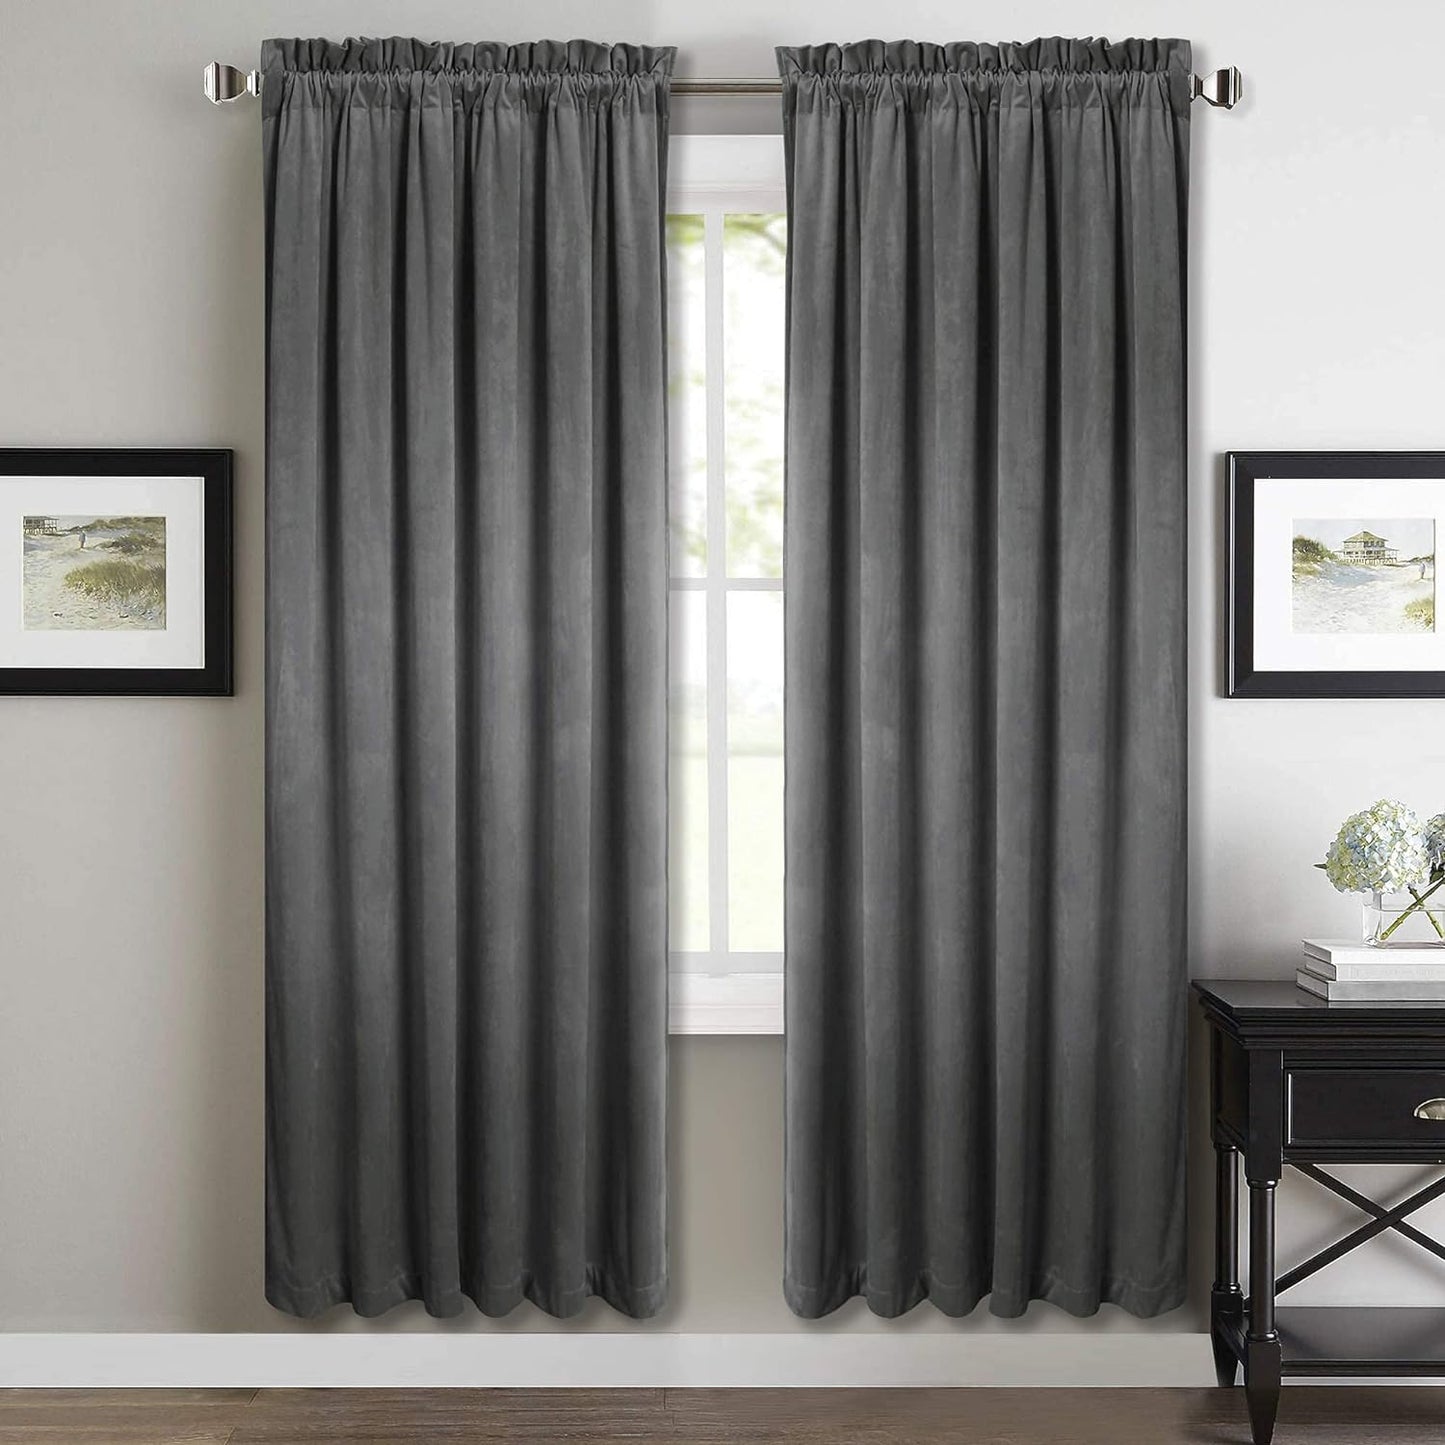 Stangh Theater Red Velvet Curtains - Super Soft Velvet Blackout Insulated Curtain Panels 84 Inches Length for Living Room Holiday Decorative Drapes for Master Bedroom, W52 X L84, 2 Panels  StangH Grey W52" X L72" 